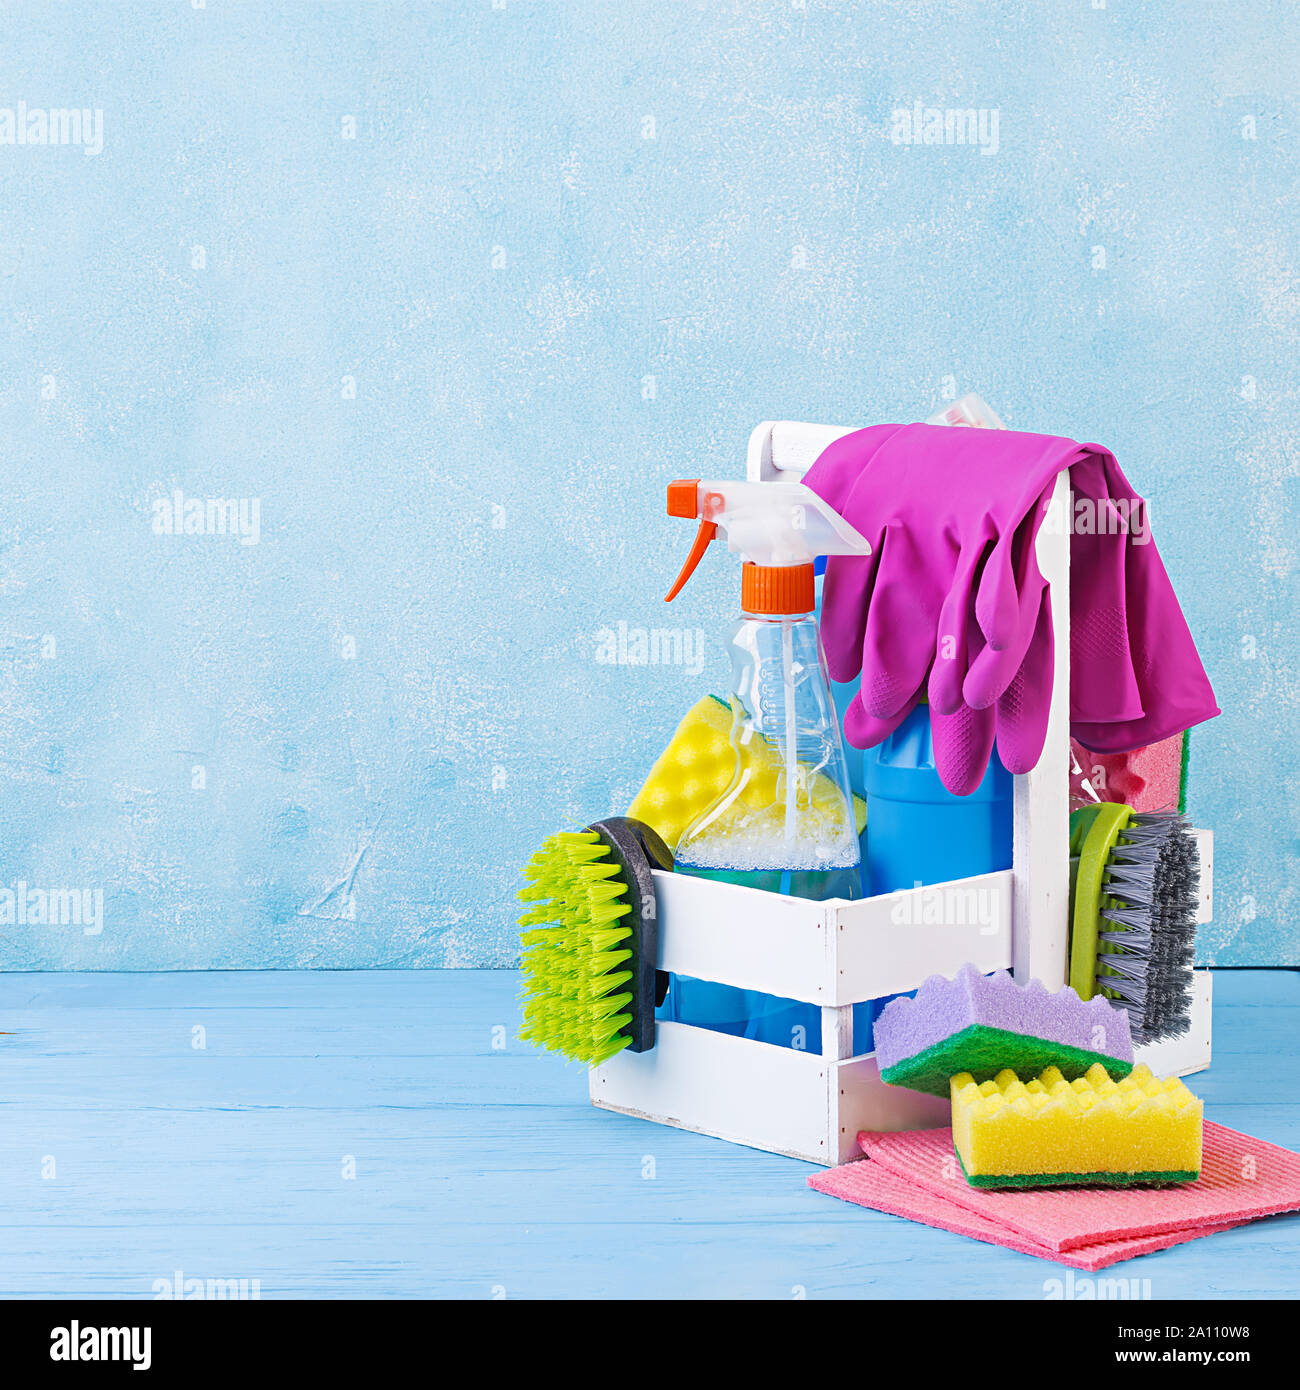 https://c8.alamy.com/comp/2A110W8/cleaning-service-concept-colorful-cleaning-set-for-different-surfaces-in-kitchen-bathroom-and-other-rooms-2A110W8.jpg